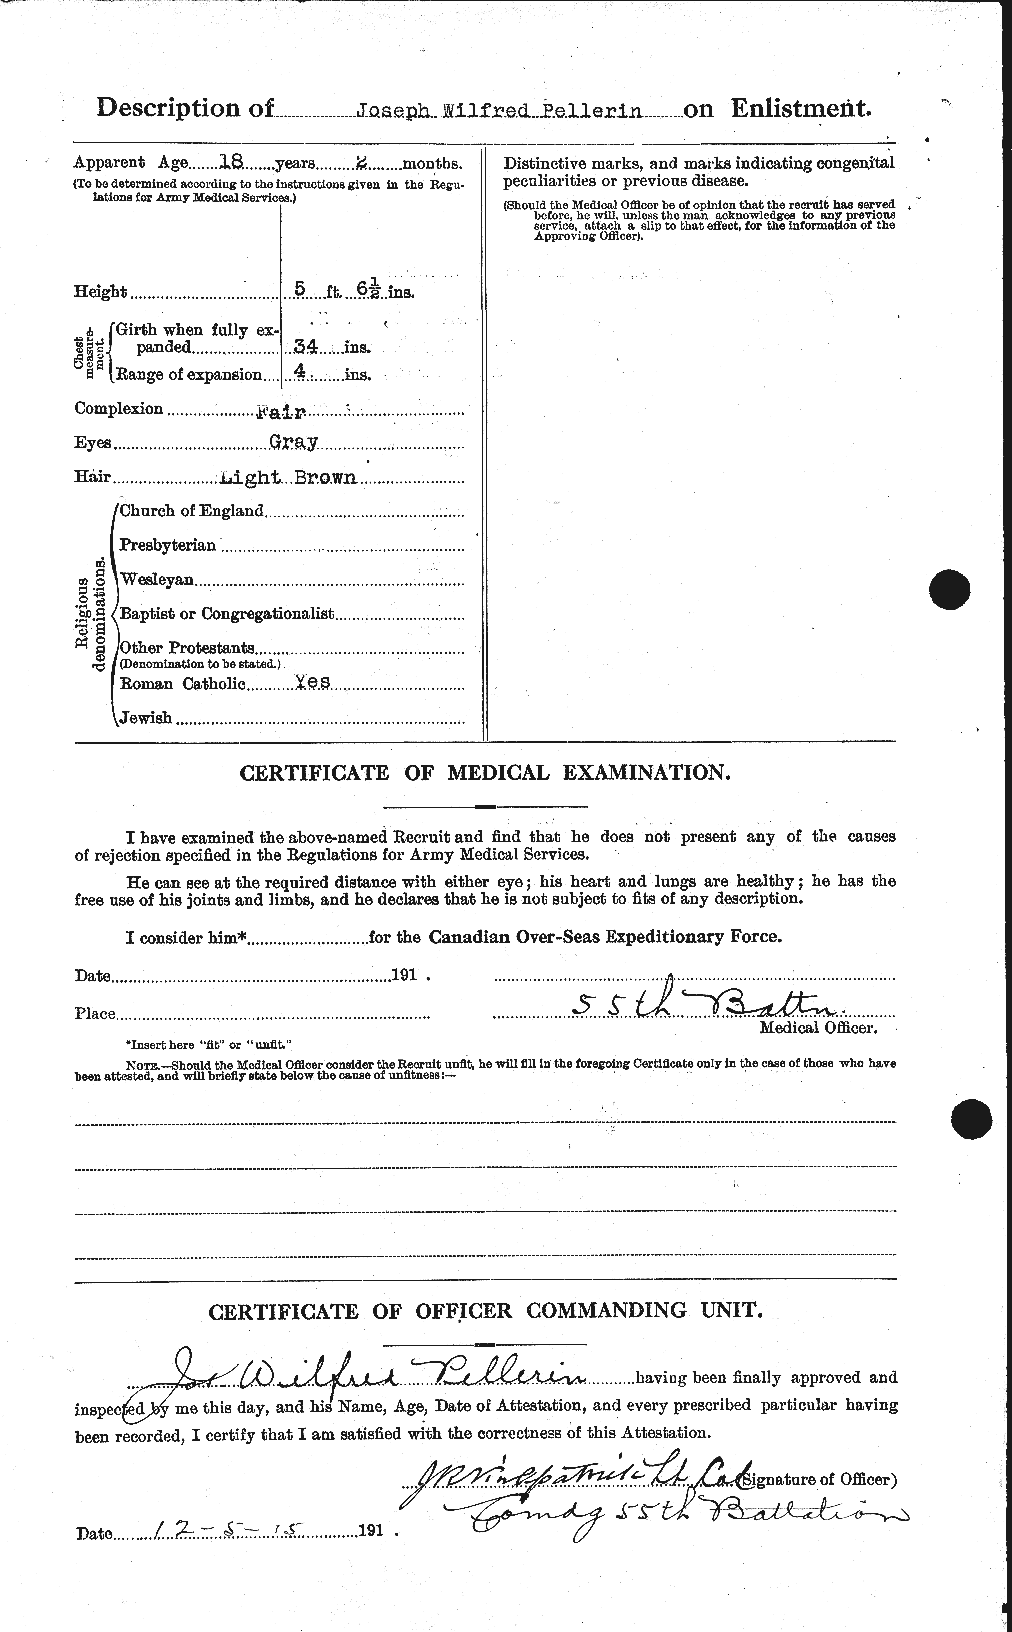 Personnel Records of the First World War - CEF 572259b